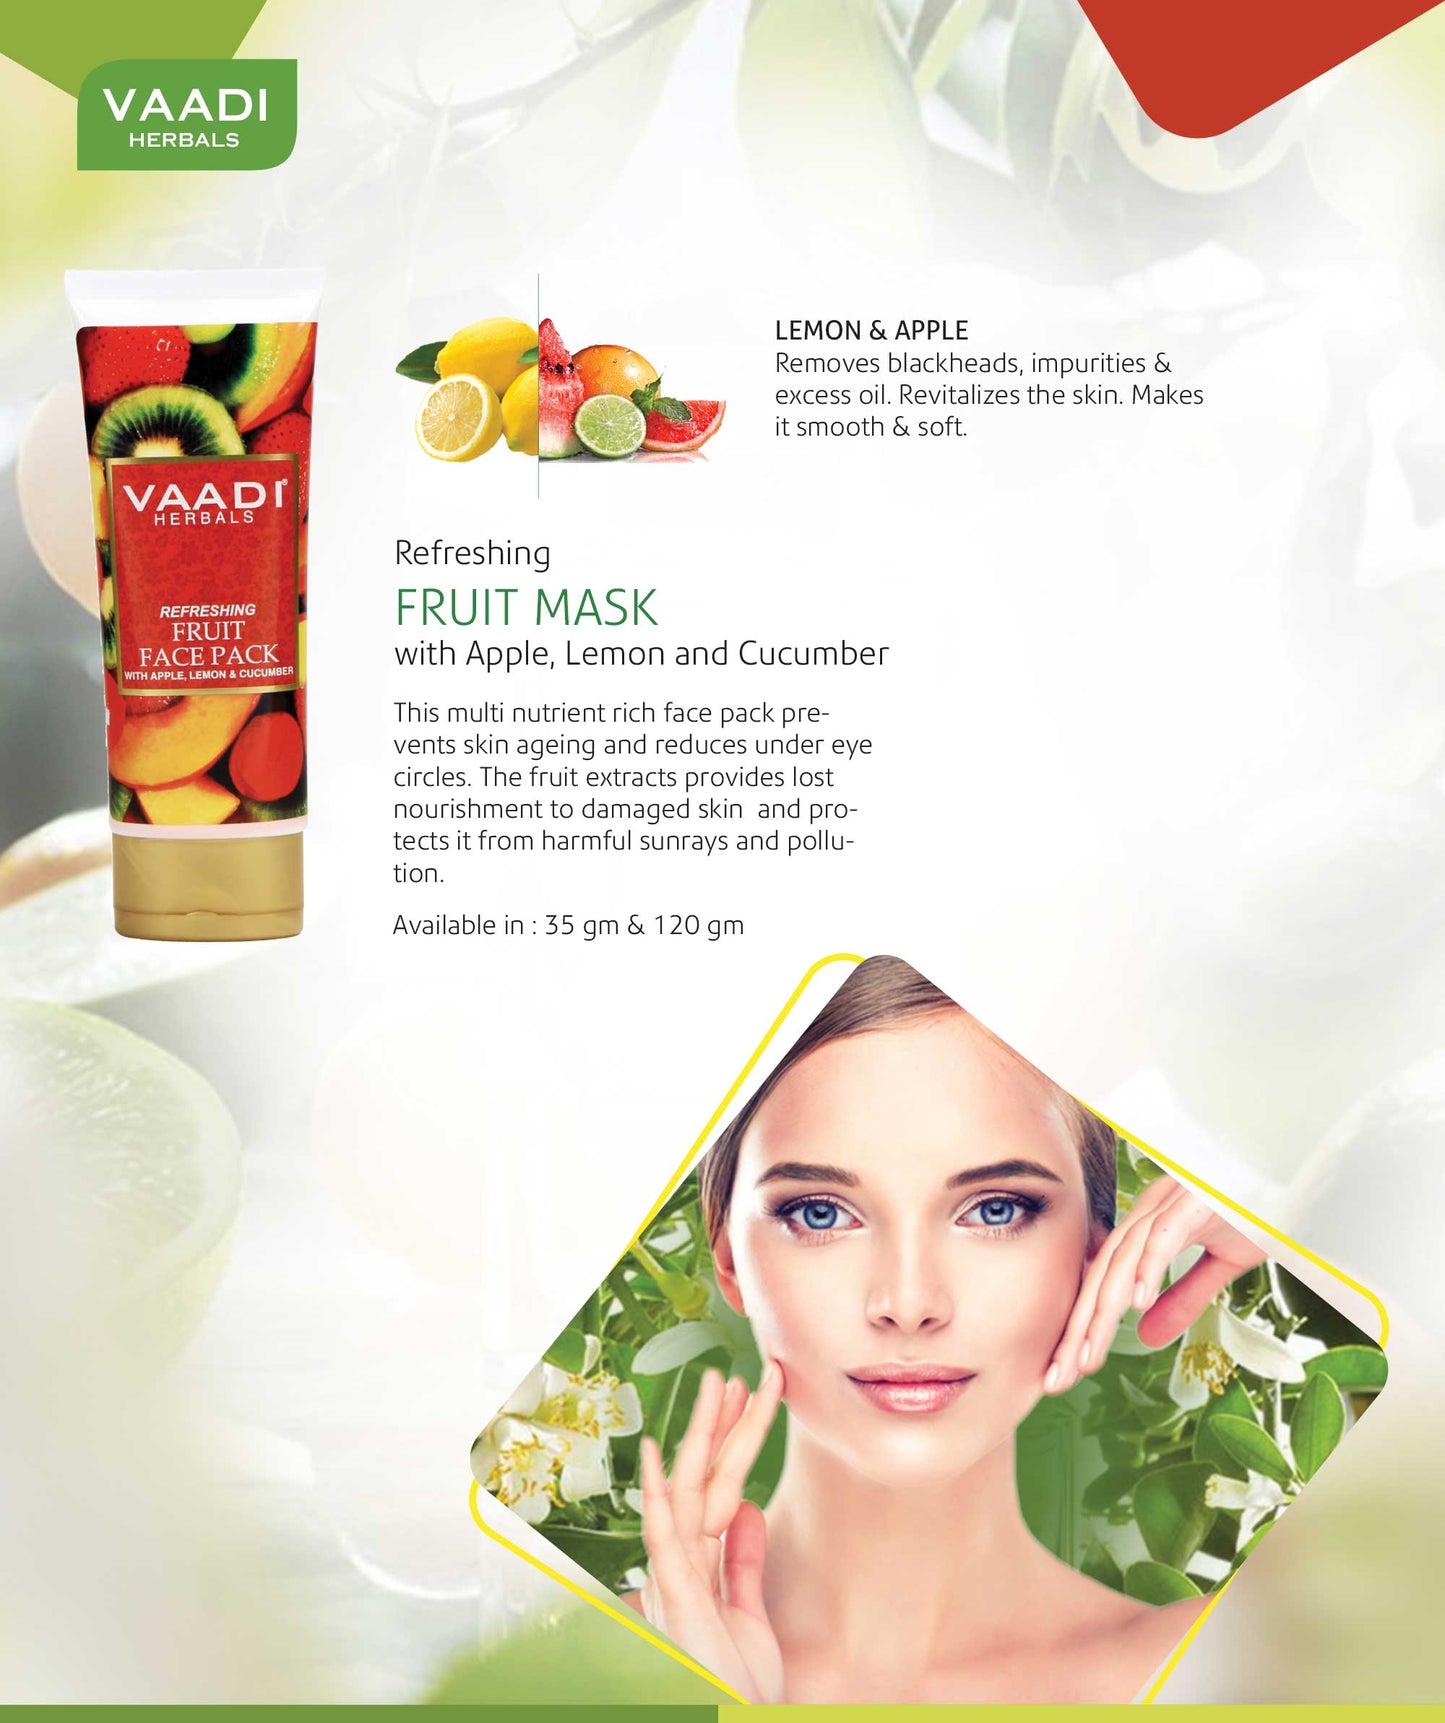 Refreshing Organic Fruit Face Pack with Apple, Lemon & Cucumber - Protects & Revitalizes Skin  (120 gms/ 4.3 oz)